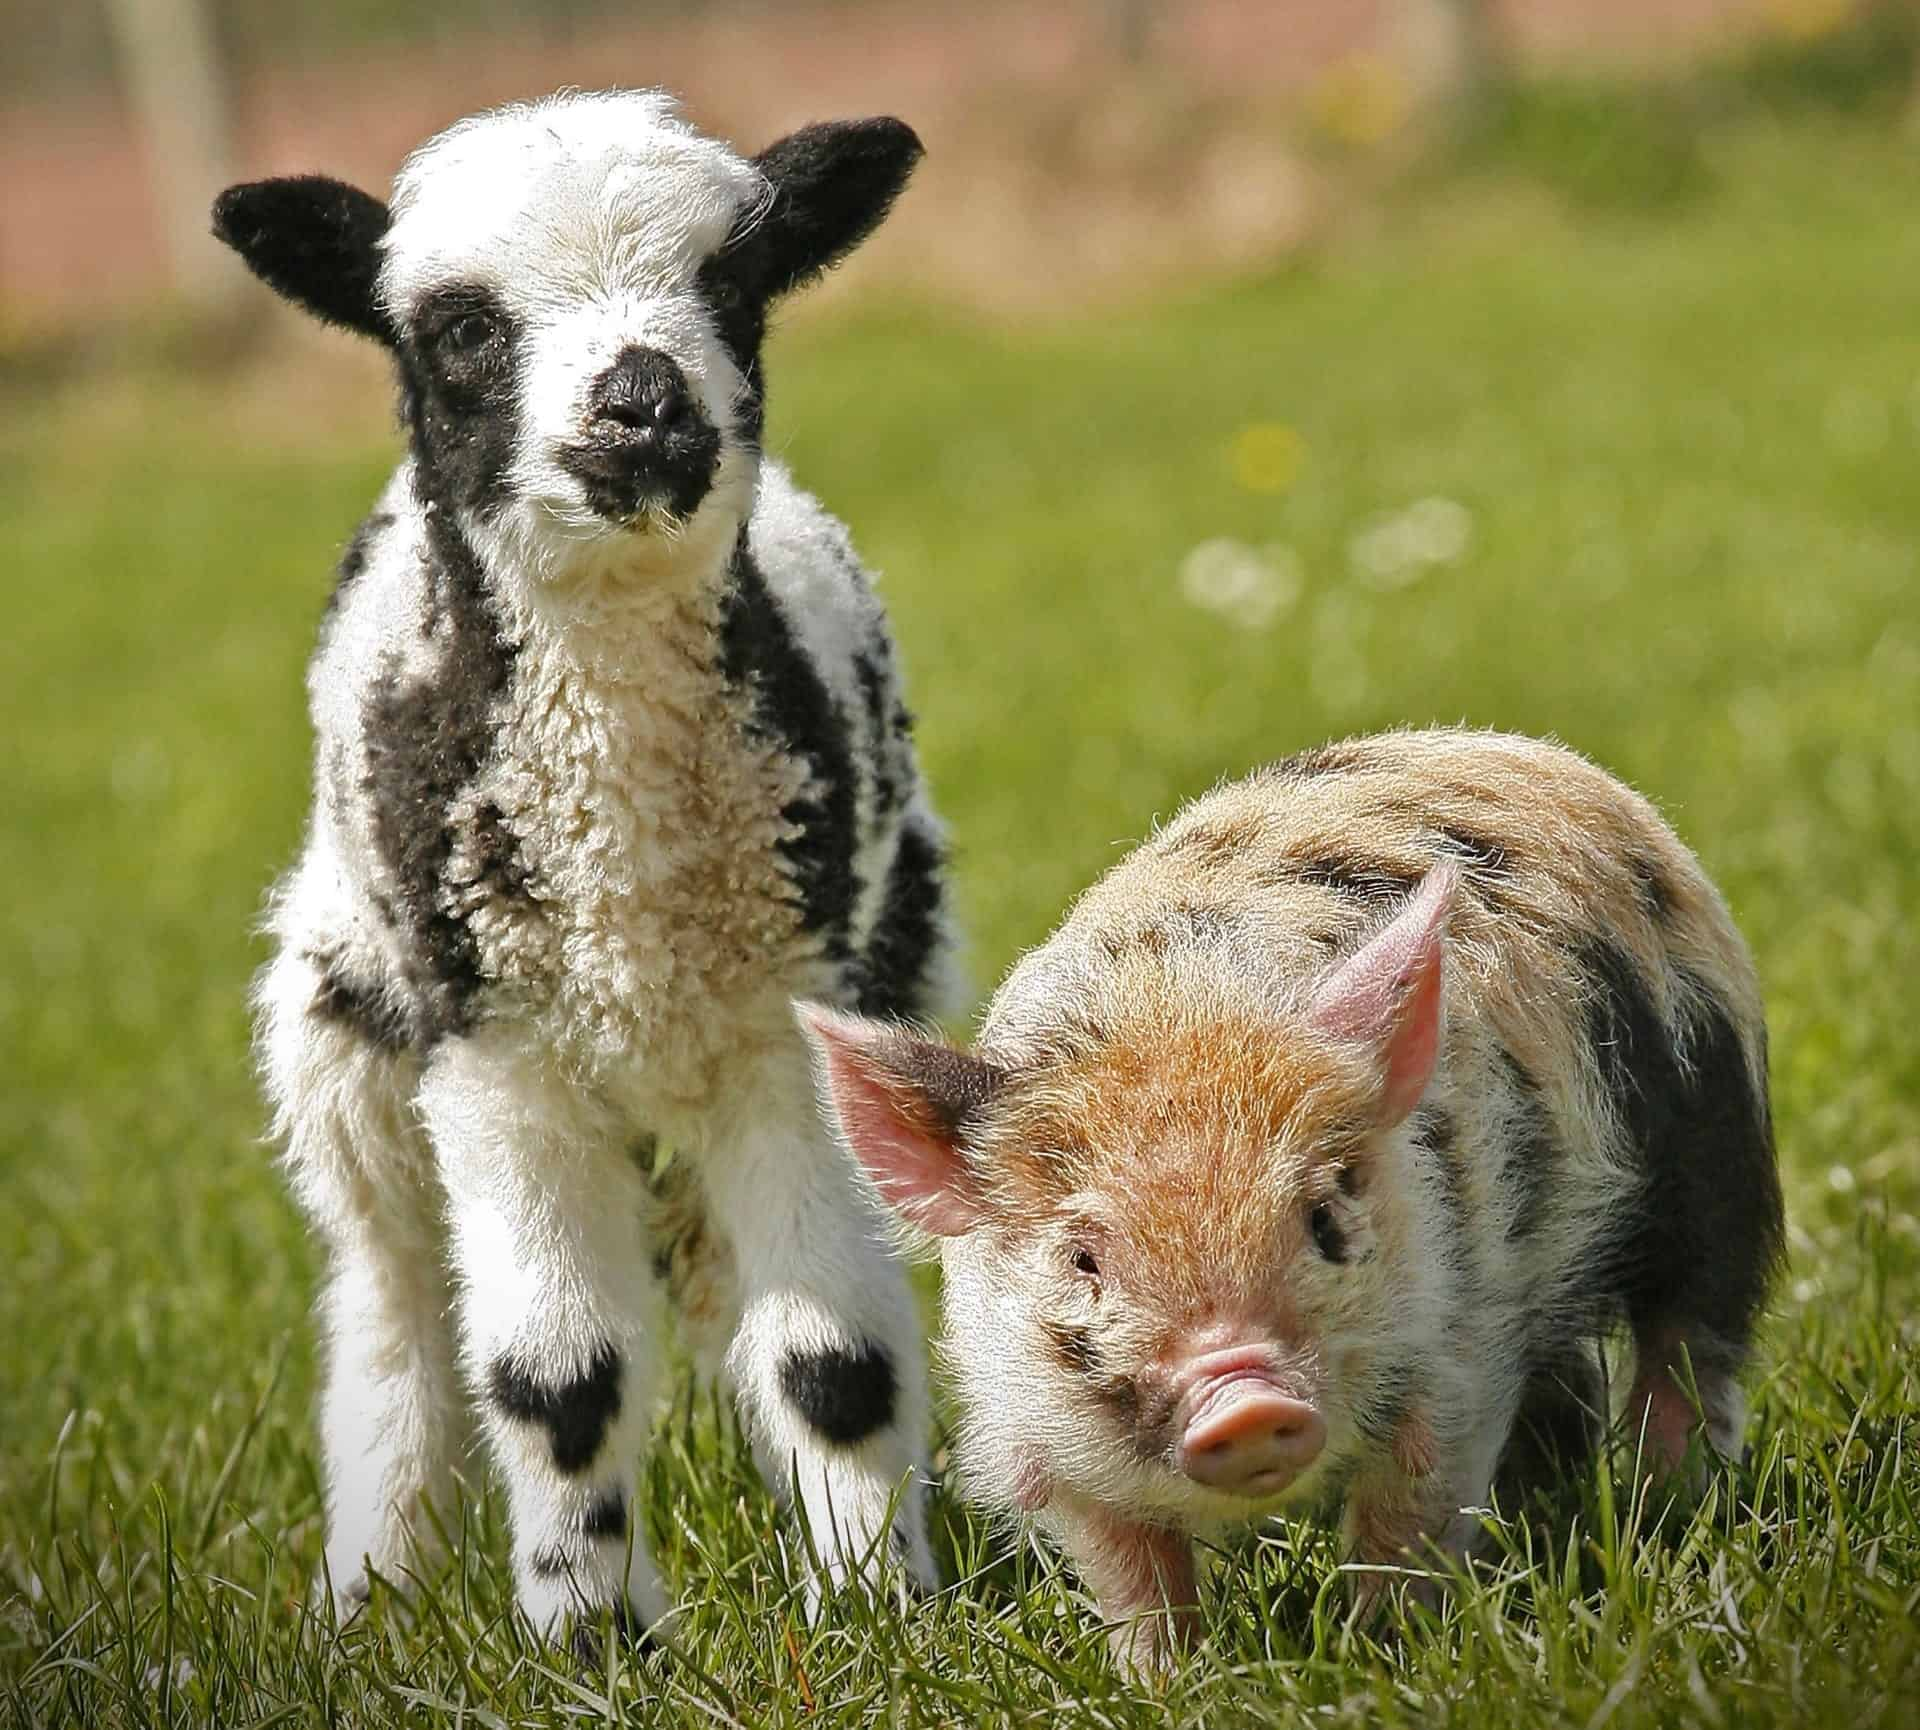 baby lamb and a micro pig side by side on the grass